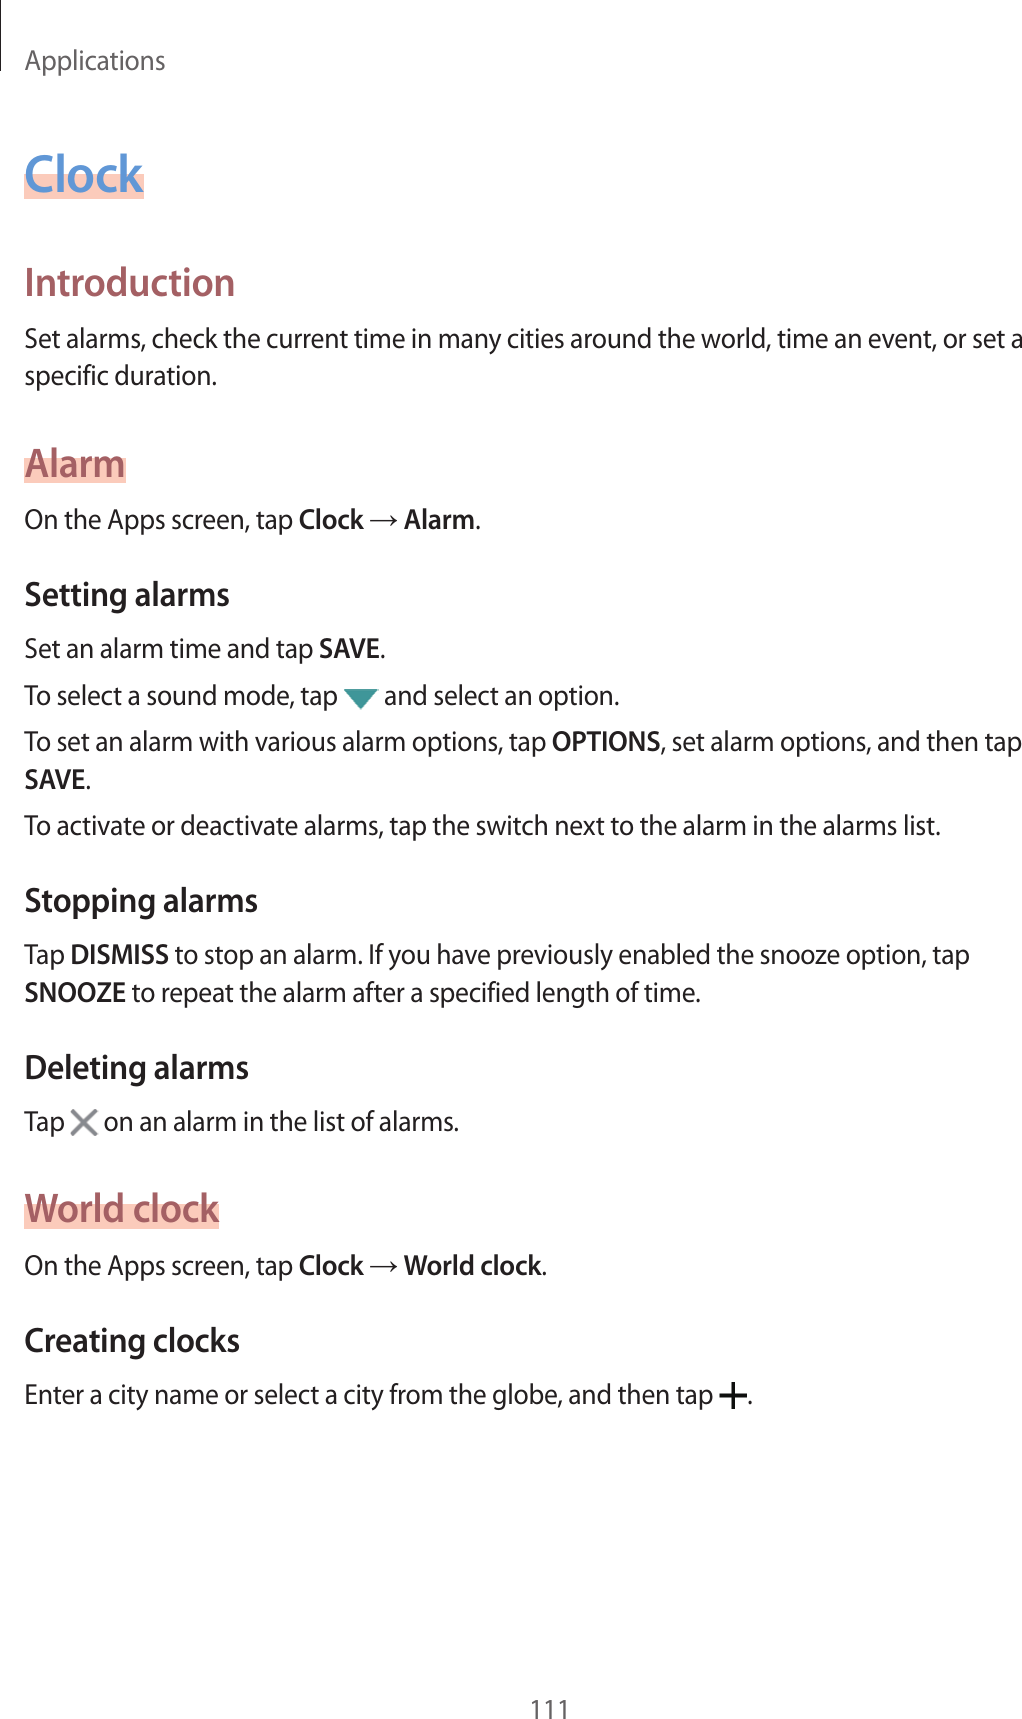 Applications111ClockIntroductionSet alarms, check the current time in man y cities ar ound the w orld , time an ev ent, or set a specific duration.AlarmOn the Apps screen, tap Clock  Alarm.Setting alarmsSet an alarm time and tap SAVE.To select a sound mode, tap   and select an option.To set an alarm with various alarm options, tap OPTIONS, set alarm options, and then tap SAVE.To activate or deactivate alarms, tap the switch ne xt to the alarm in the alarms list.Stopping alarmsTap DISMISS to stop an alarm. If you hav e pr eviously enabled the snoo z e option, tap SNOOZE to repea t the alarm after a specified length of time.Deleting alarmsTap   on an alarm in the list of alarms.World clockOn the Apps screen, tap Clock  World clock.Crea ting clocksEnter a city name or select a city from the globe , and then tap  .